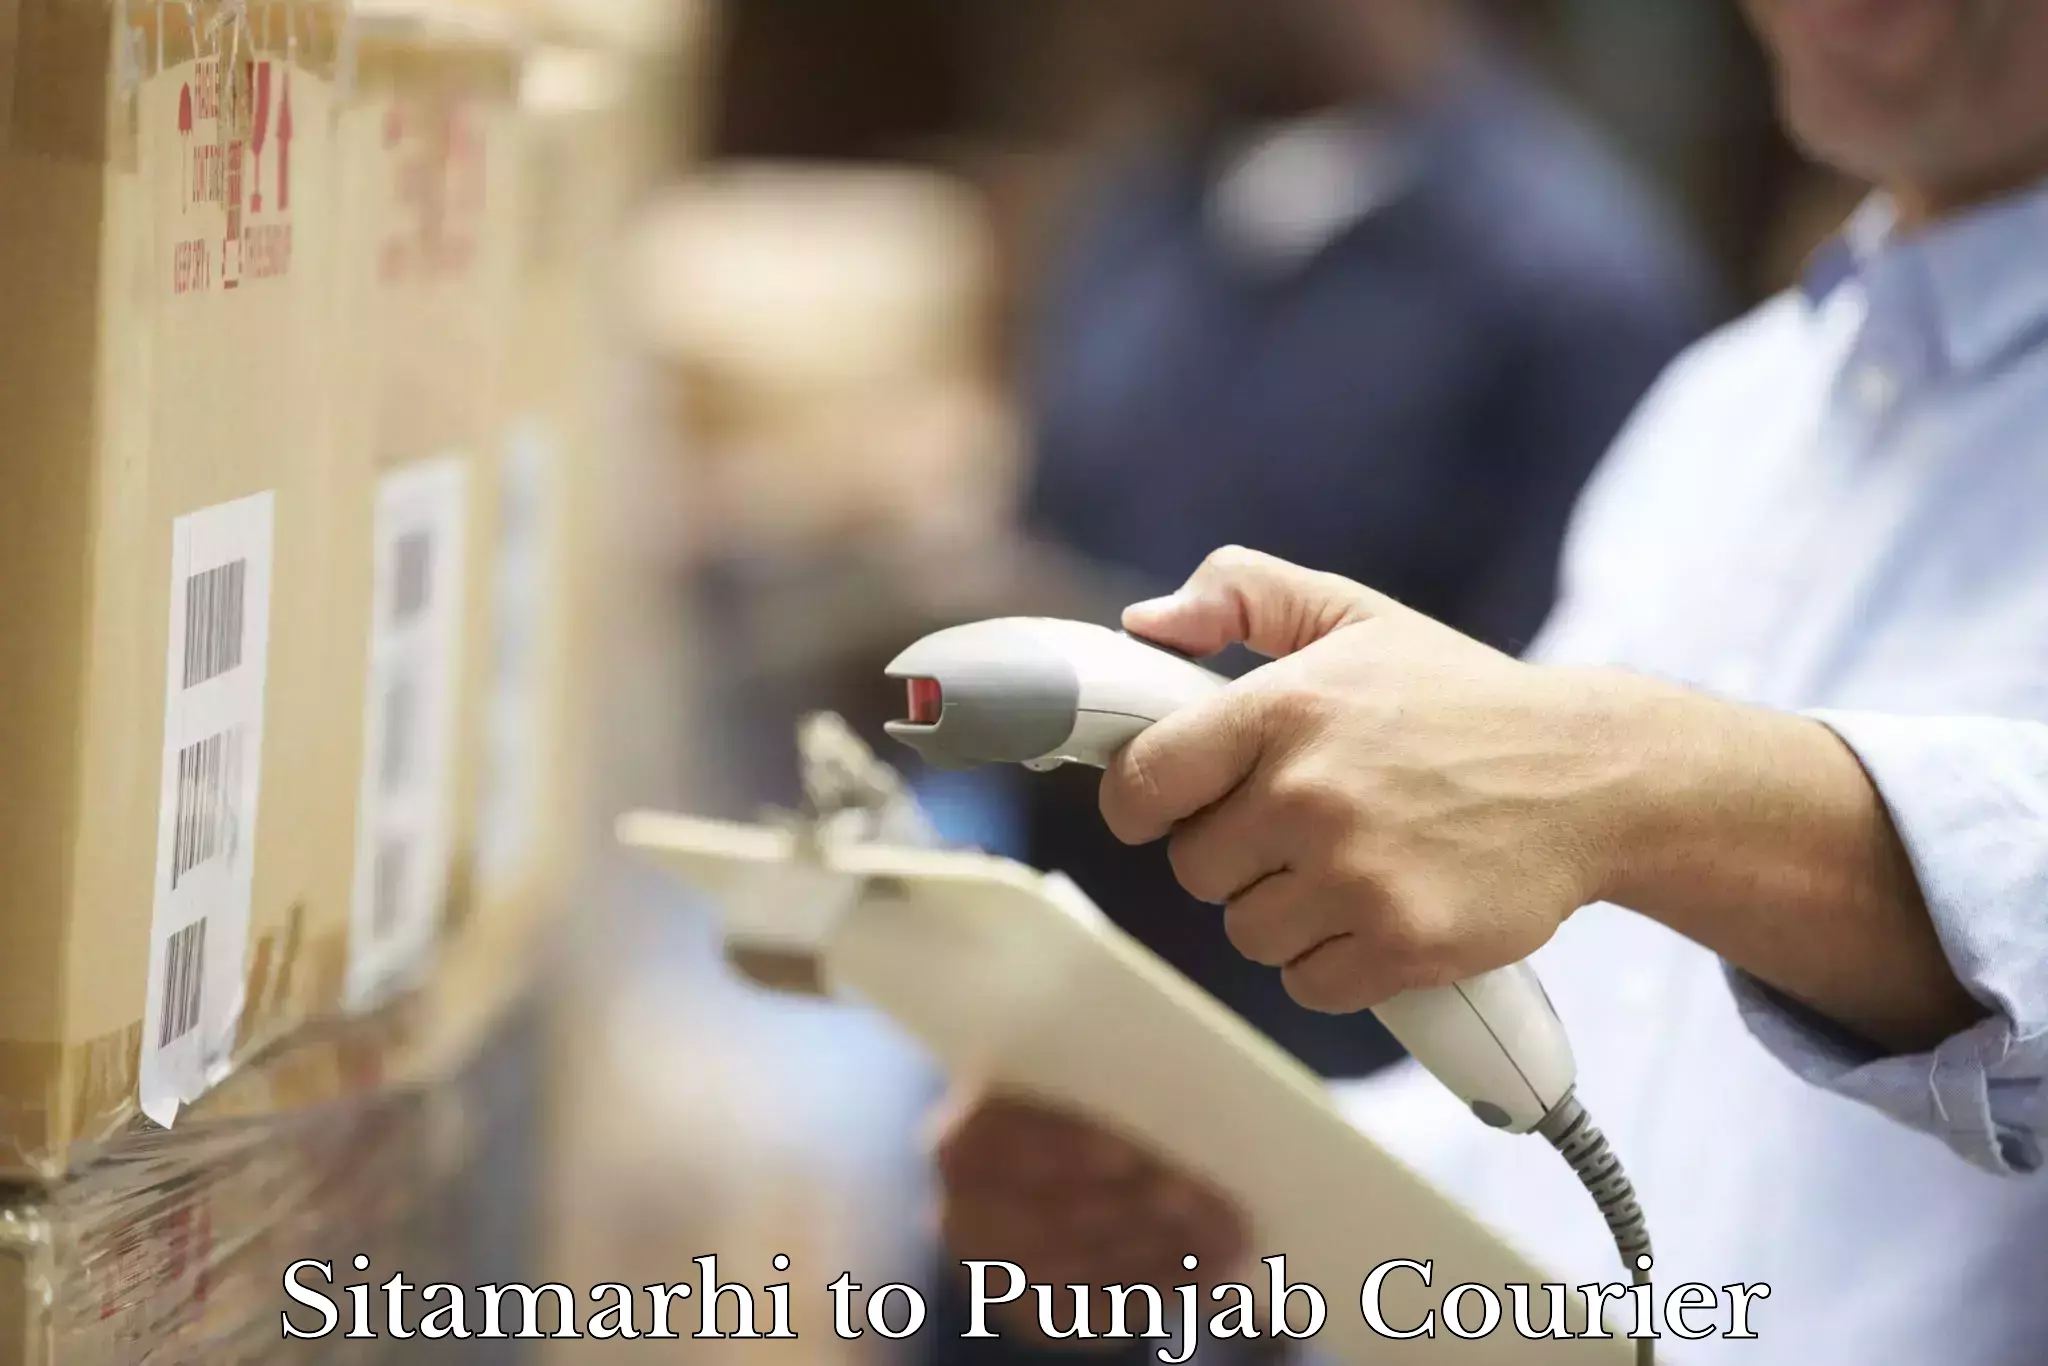 Automated shipping processes Sitamarhi to Mohali